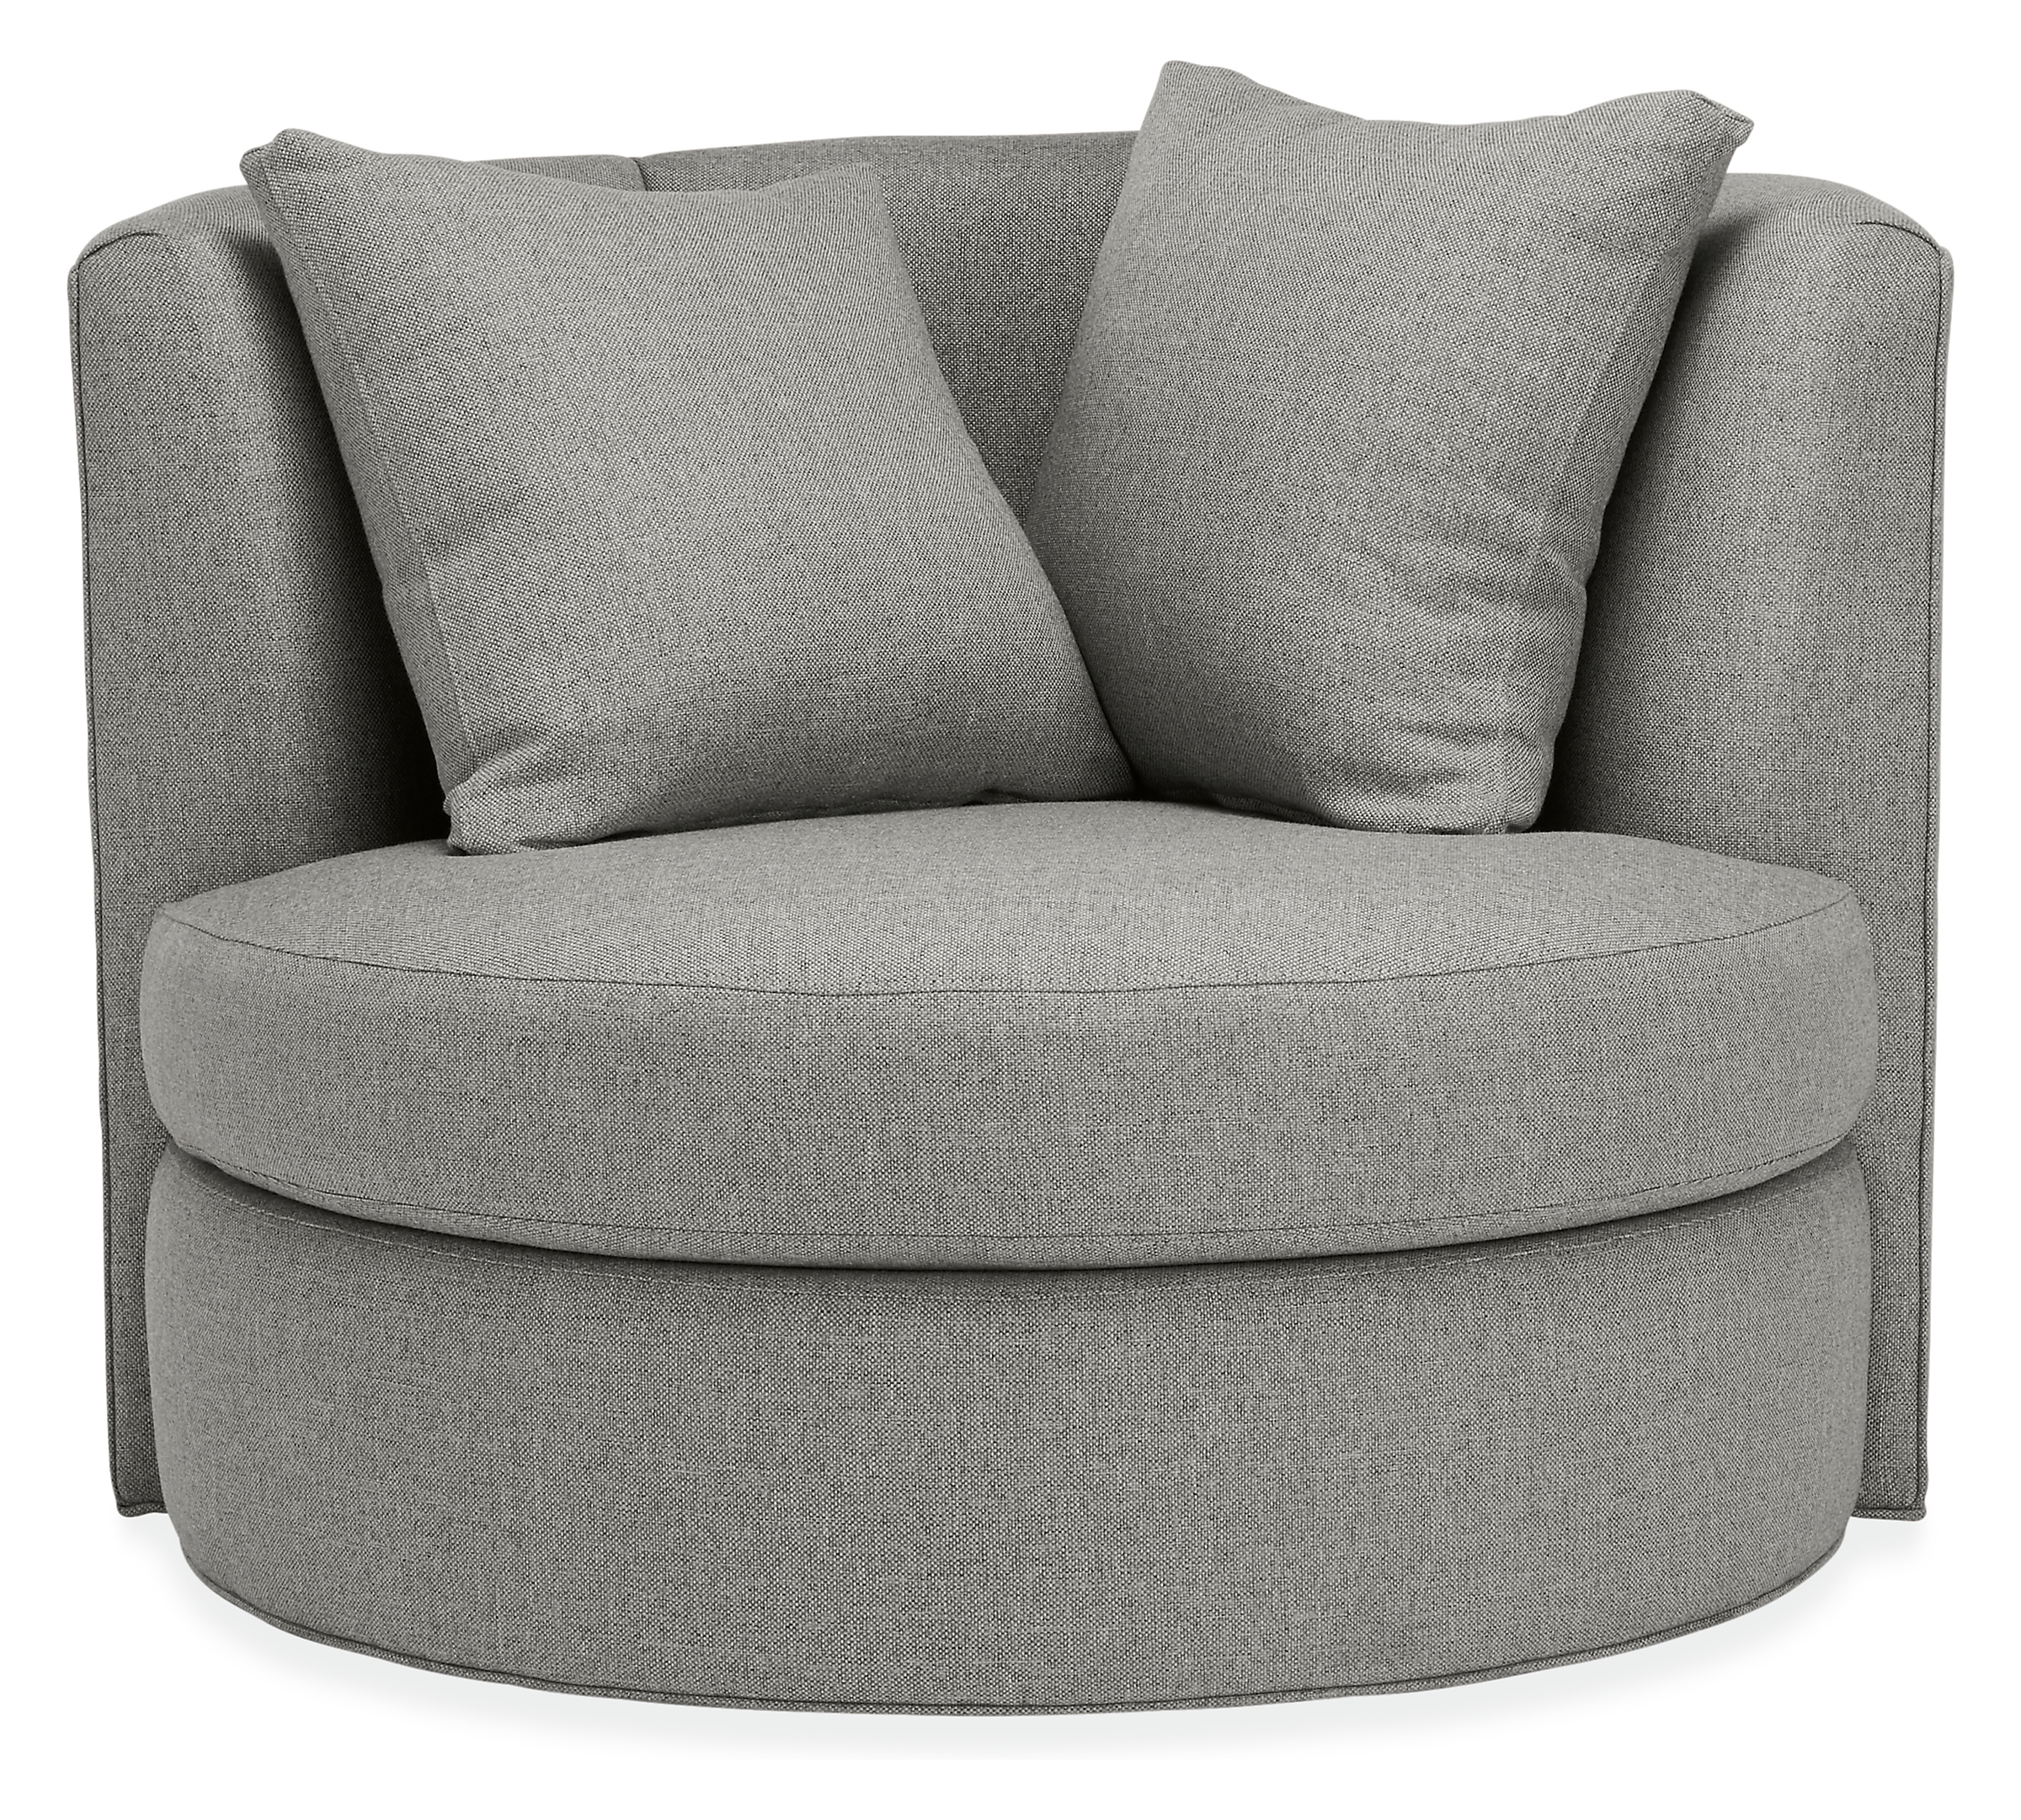 Front view of Alcove 42 Swivel Chair in Mist Steel.